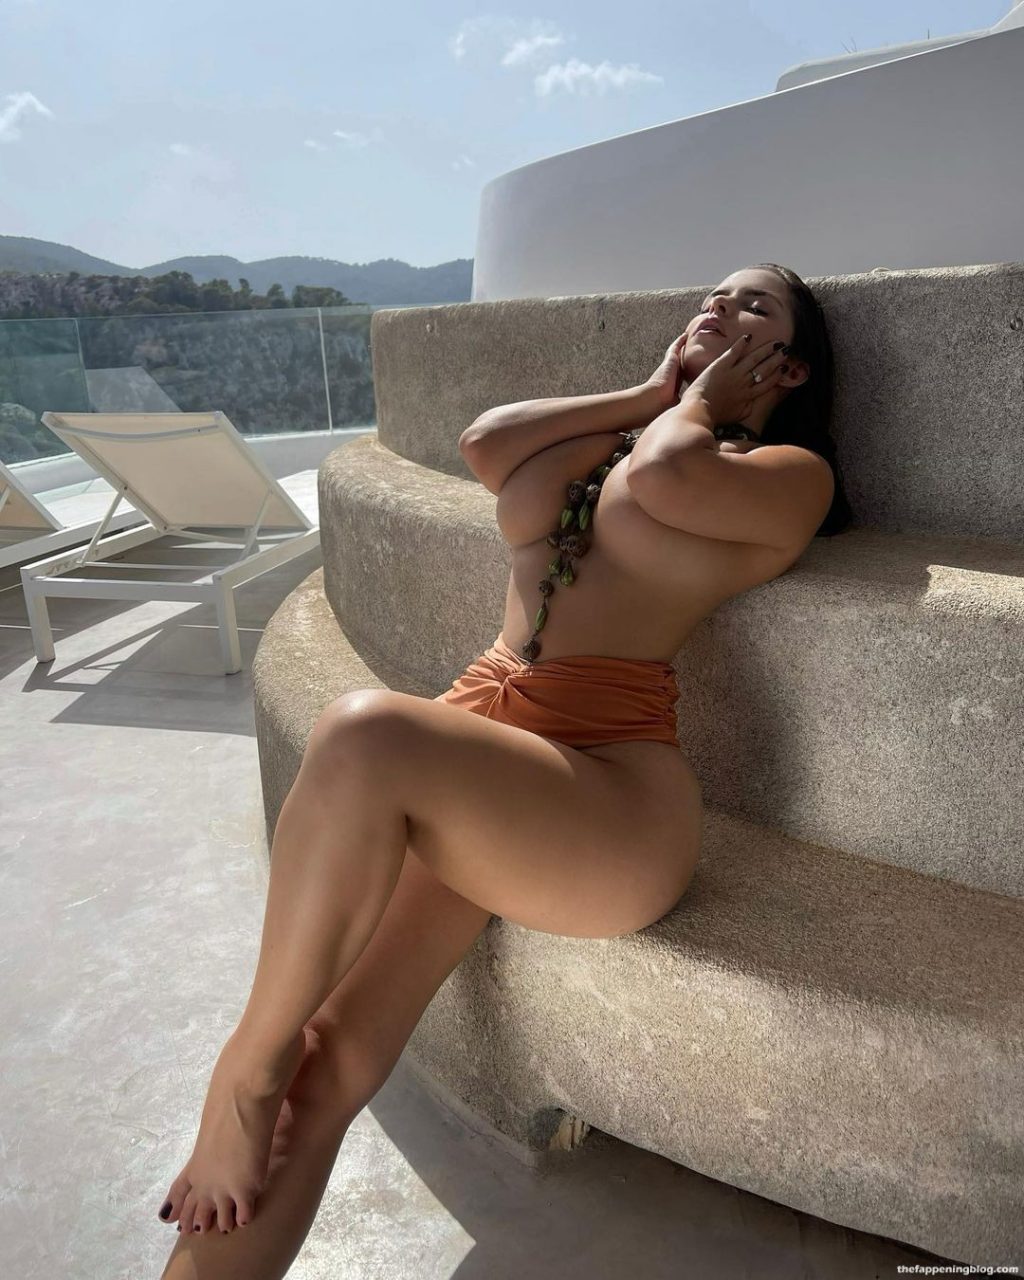 Demi Rose Enjoys a Sunny Day Topless (1 Photo)